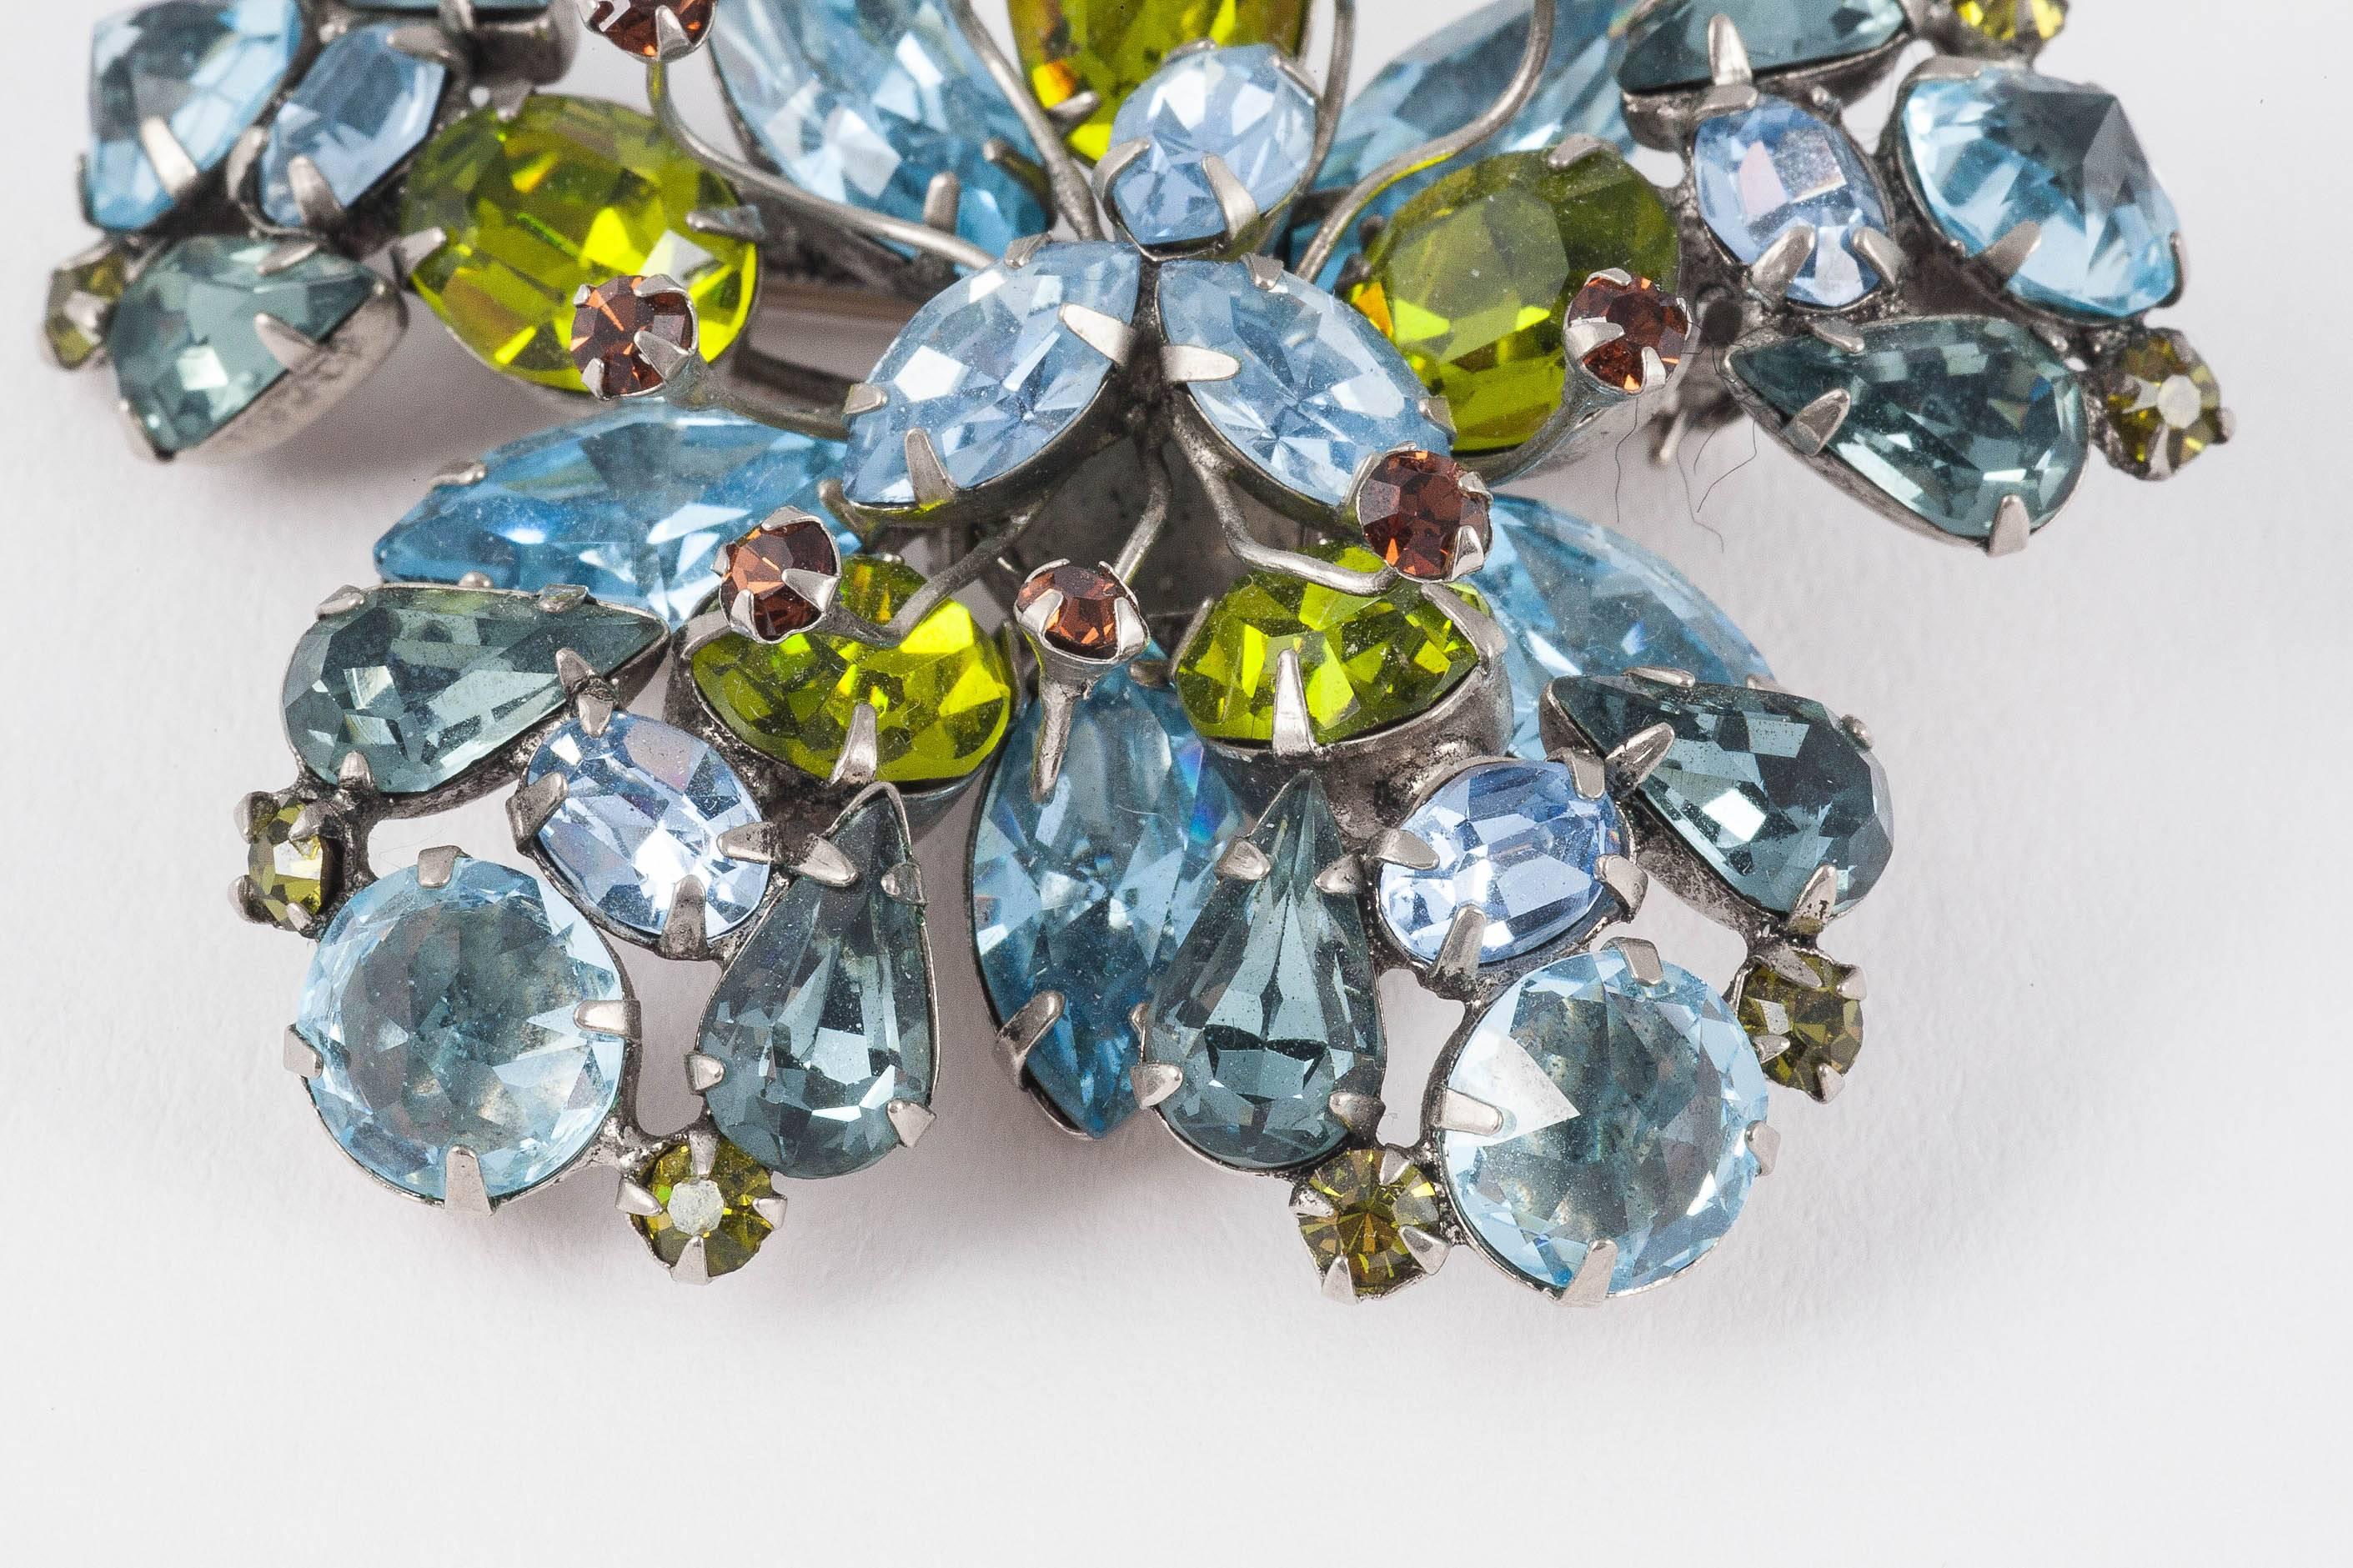 The reason we all love Henry Schreiner is his incredible colour combinations. The wonderful Peridot coloured Austrian crystal, the inverted blue crystals and his use of many different shapes in one piece always create excitement. Then the addition